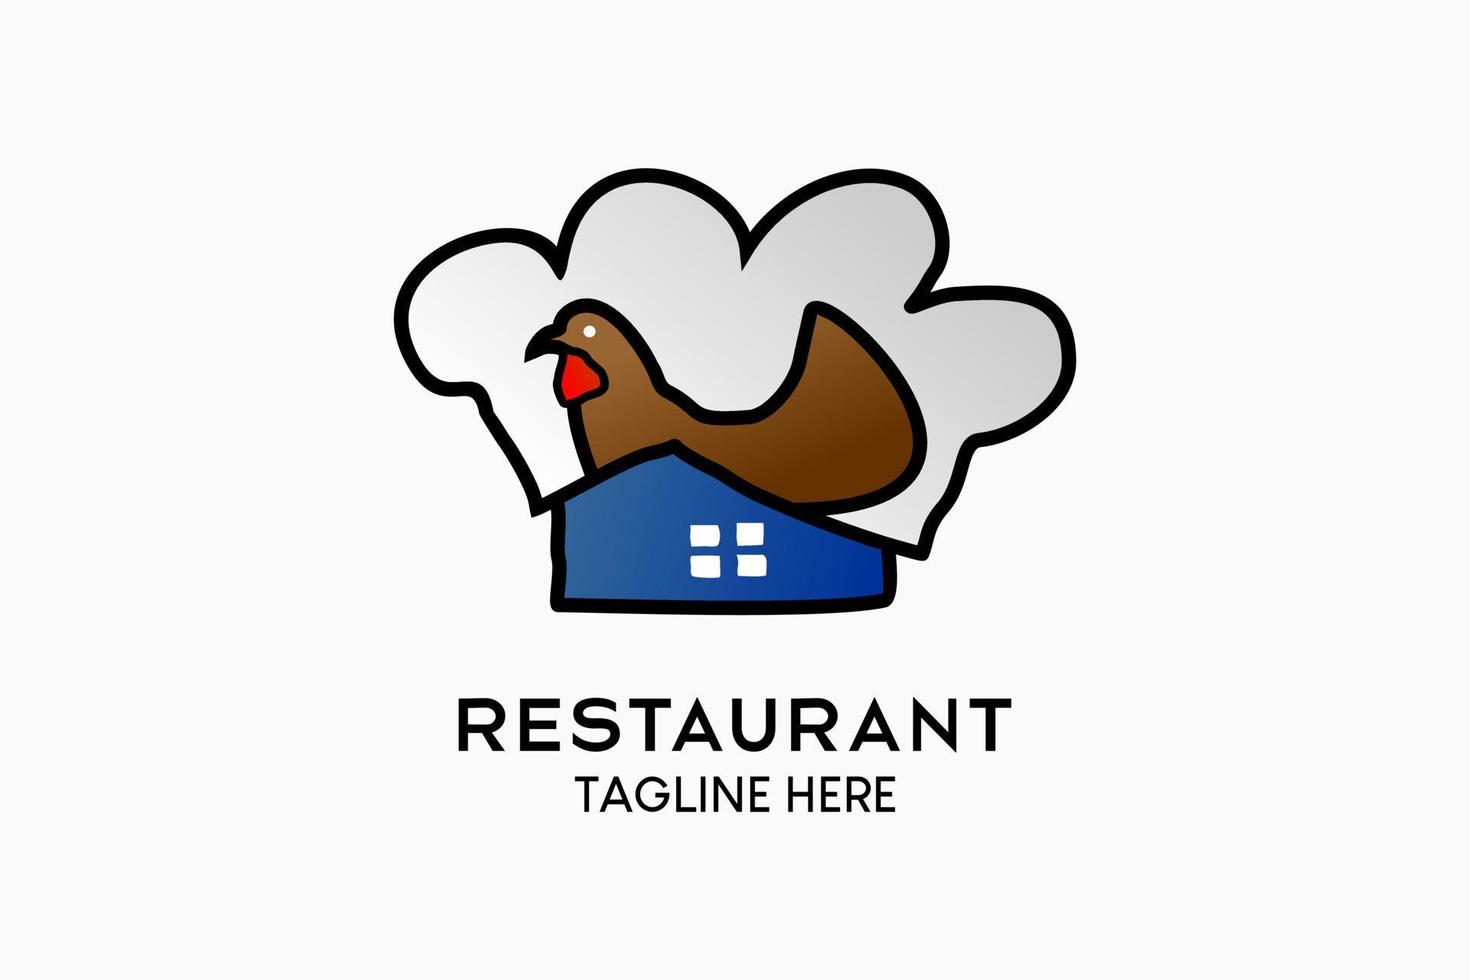 Restaurant logo design with a creative hand-drawn concept, a chicken icon with a house icon combined with a chef's hat. Modern vector illustration